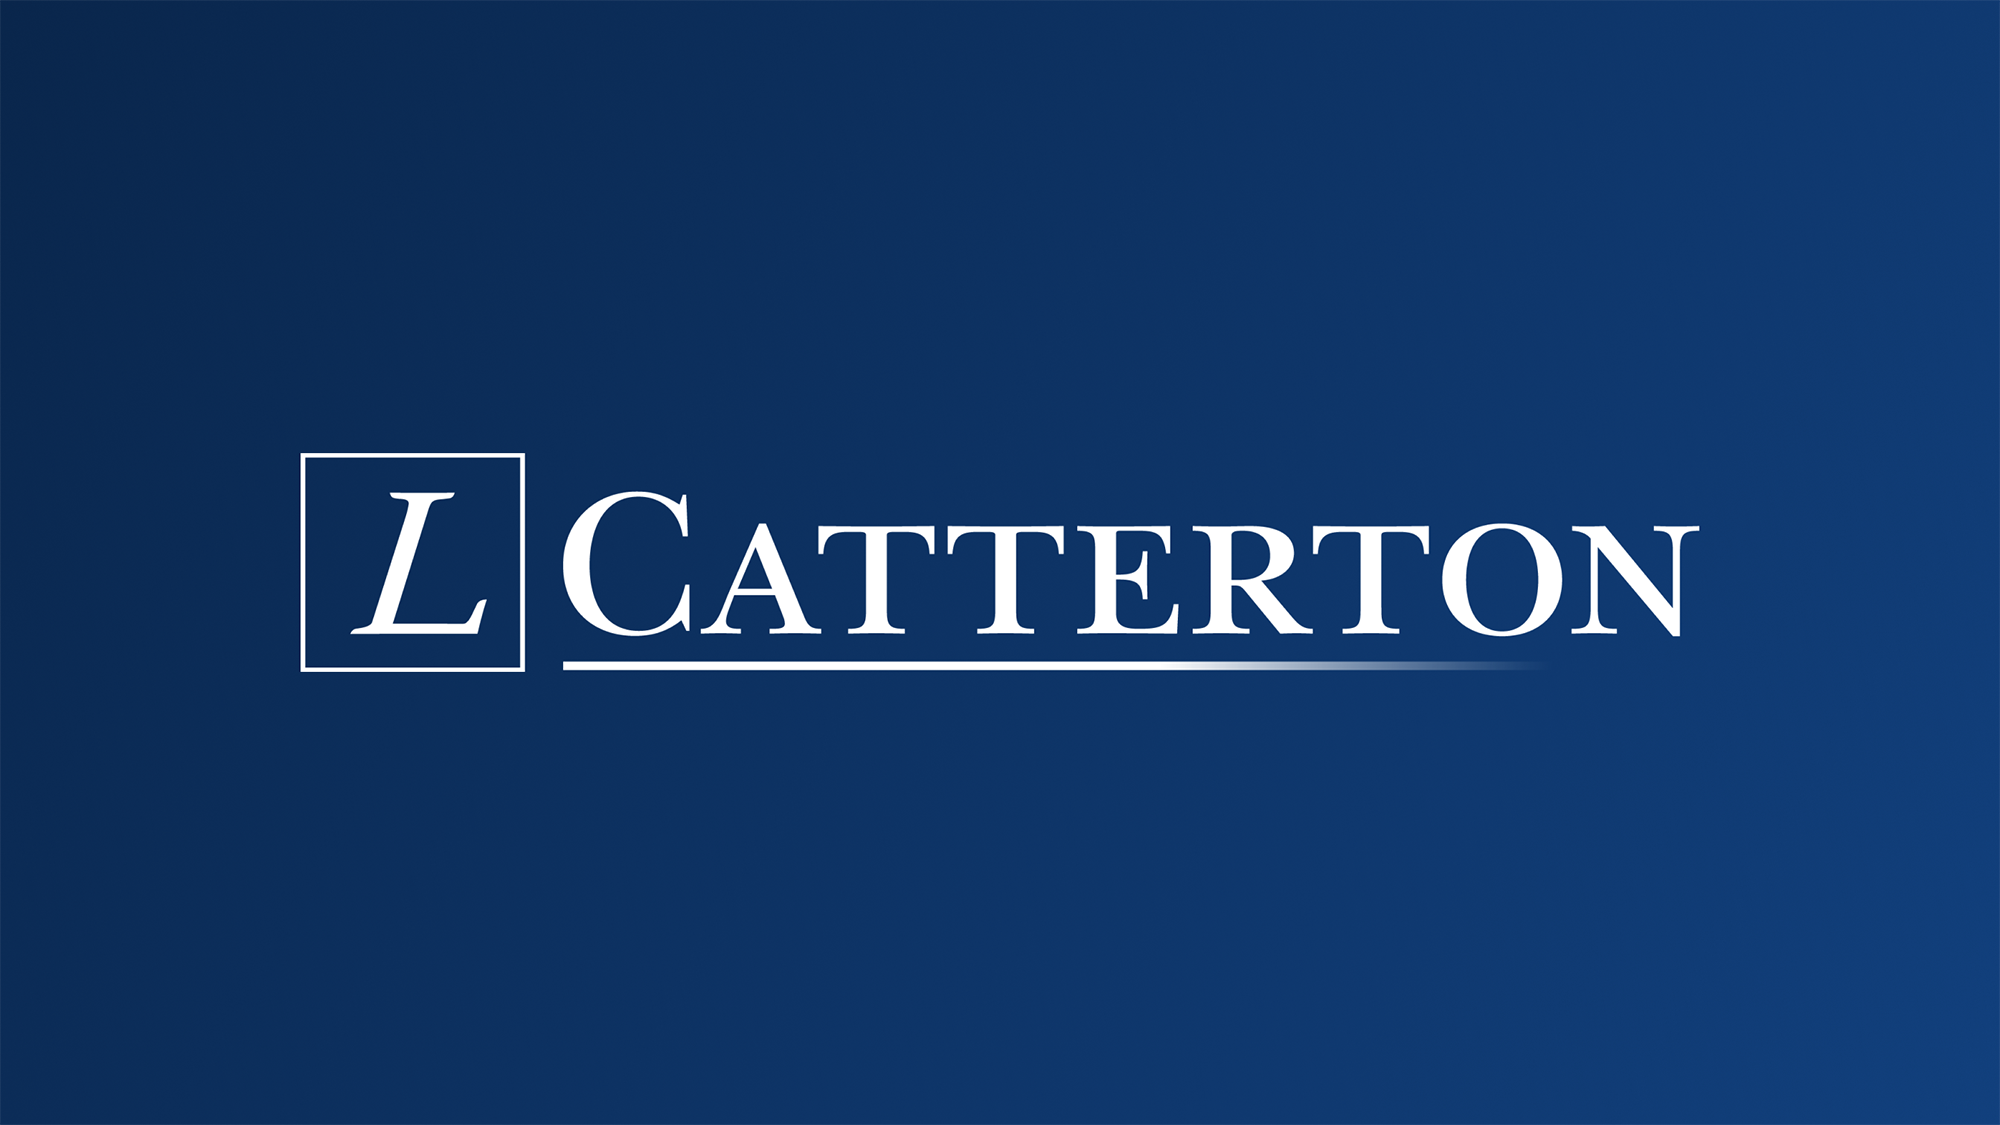 L Catterton: A Blend of Consumer Insight and Luxury Brand Expertise